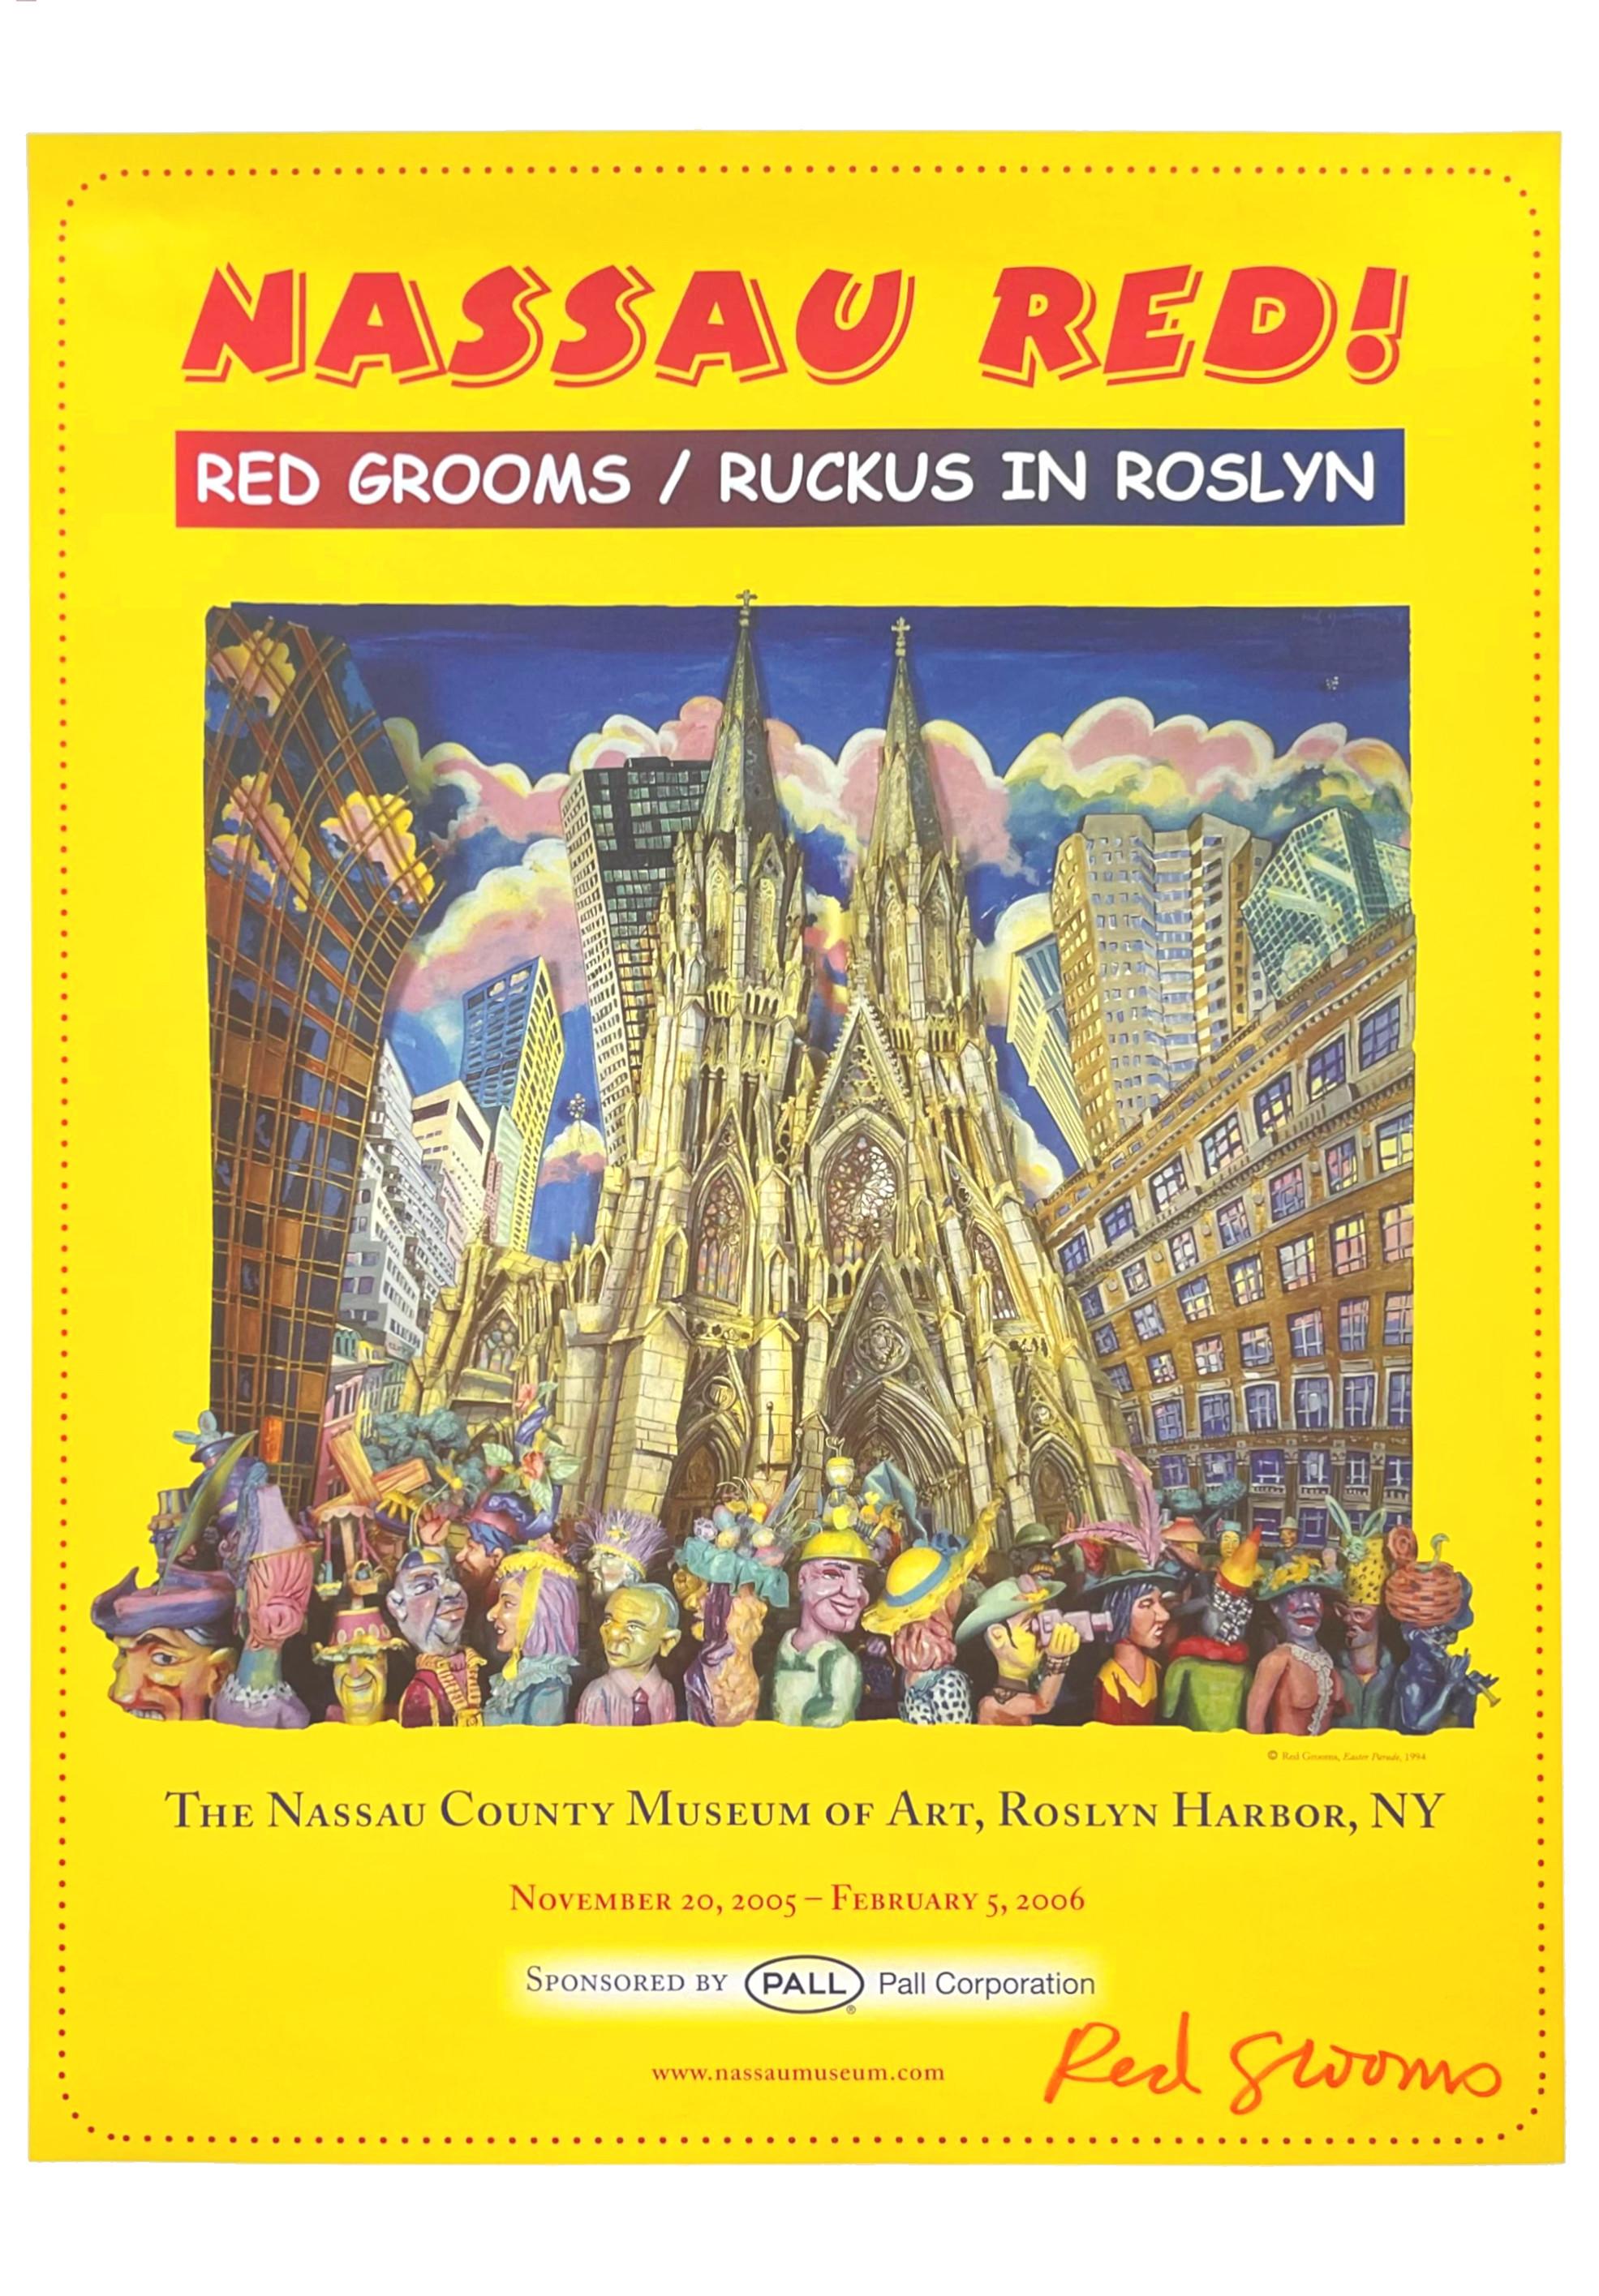 Red Grooms
Nassau Red poster (hand signed in red marker by Red Grooms), 2005
Offset lithograph poster
Hand signed by the artist with red marker on the front
32 × 22 inches
Unframed
This poster was published on the occasion of the exhibition "Nassau